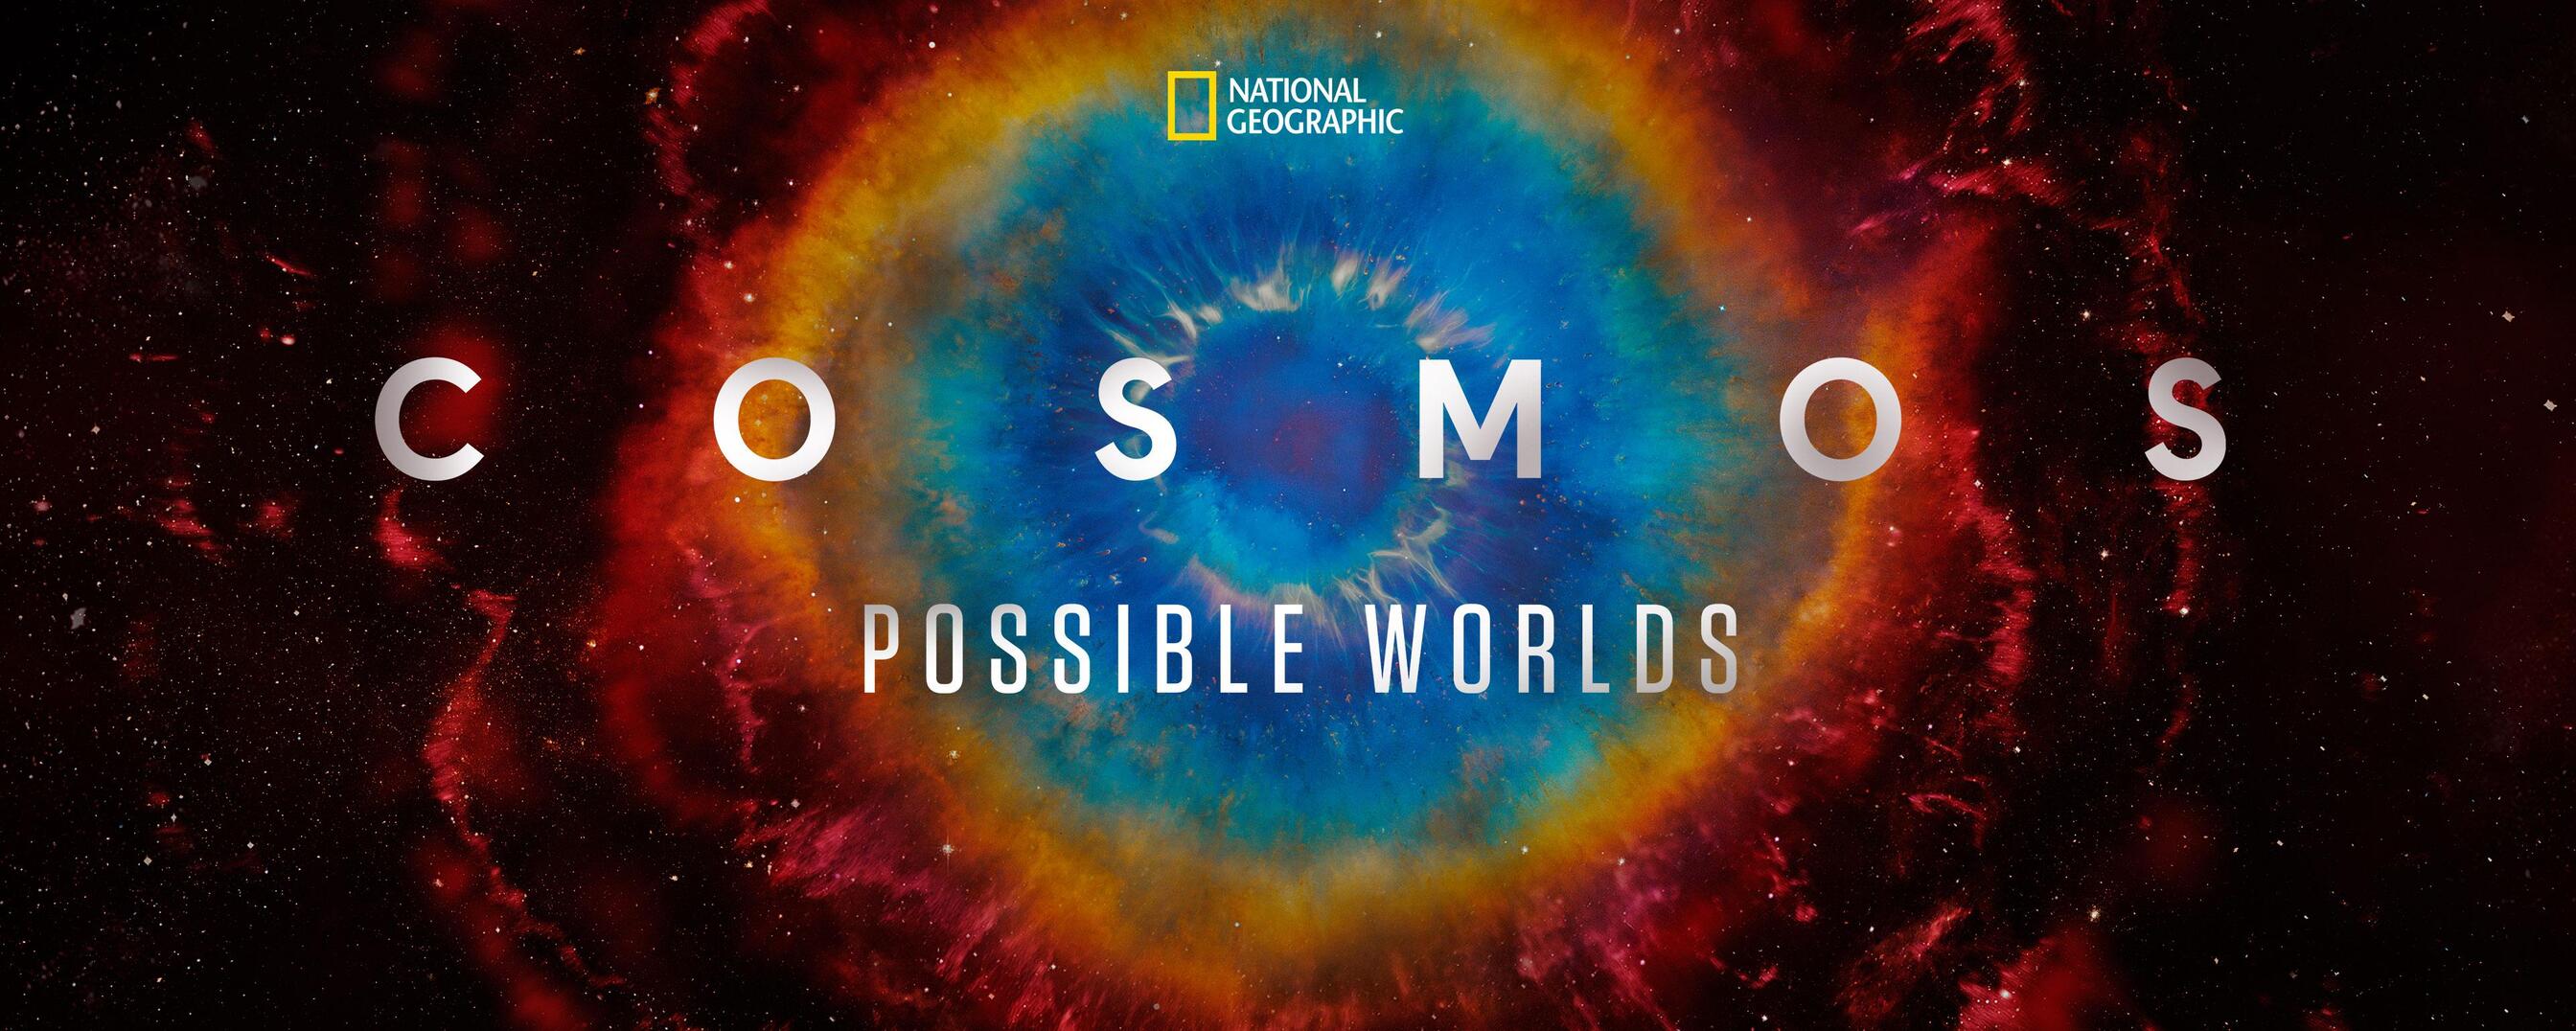 Watch Cosmos: Possible Worlds Tv Show - Streaming Online | Nat Geo Tv